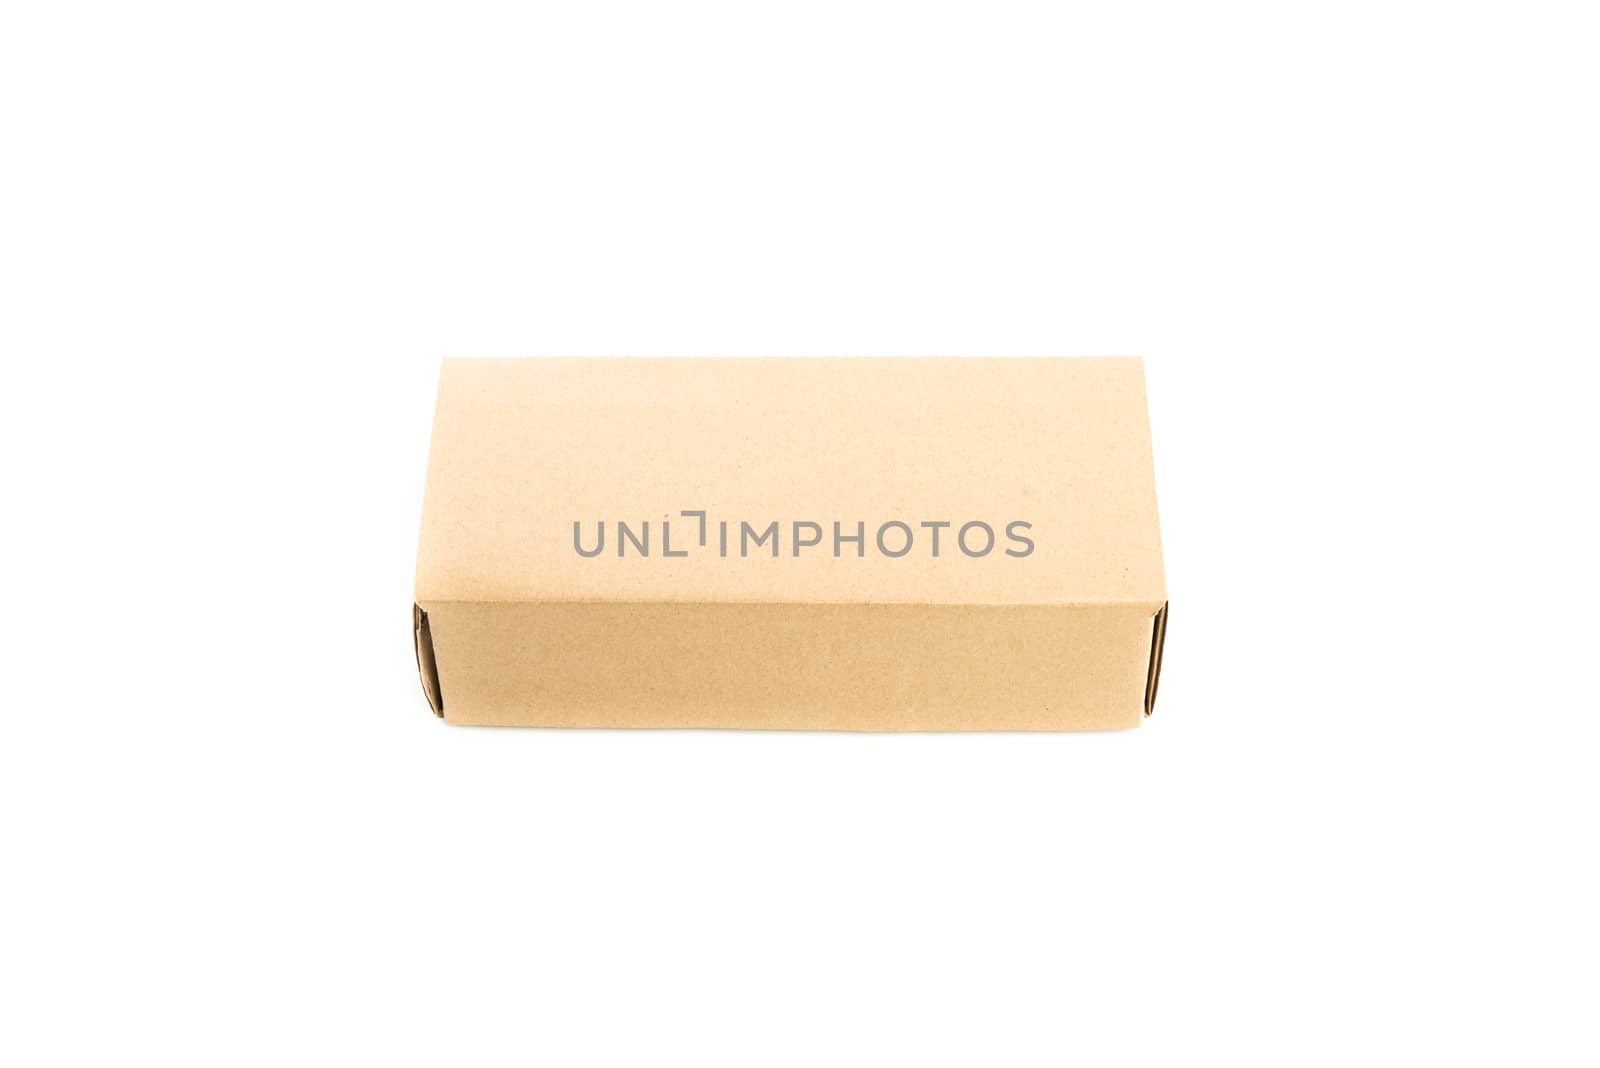 Cardboard Box isolated on Over White background